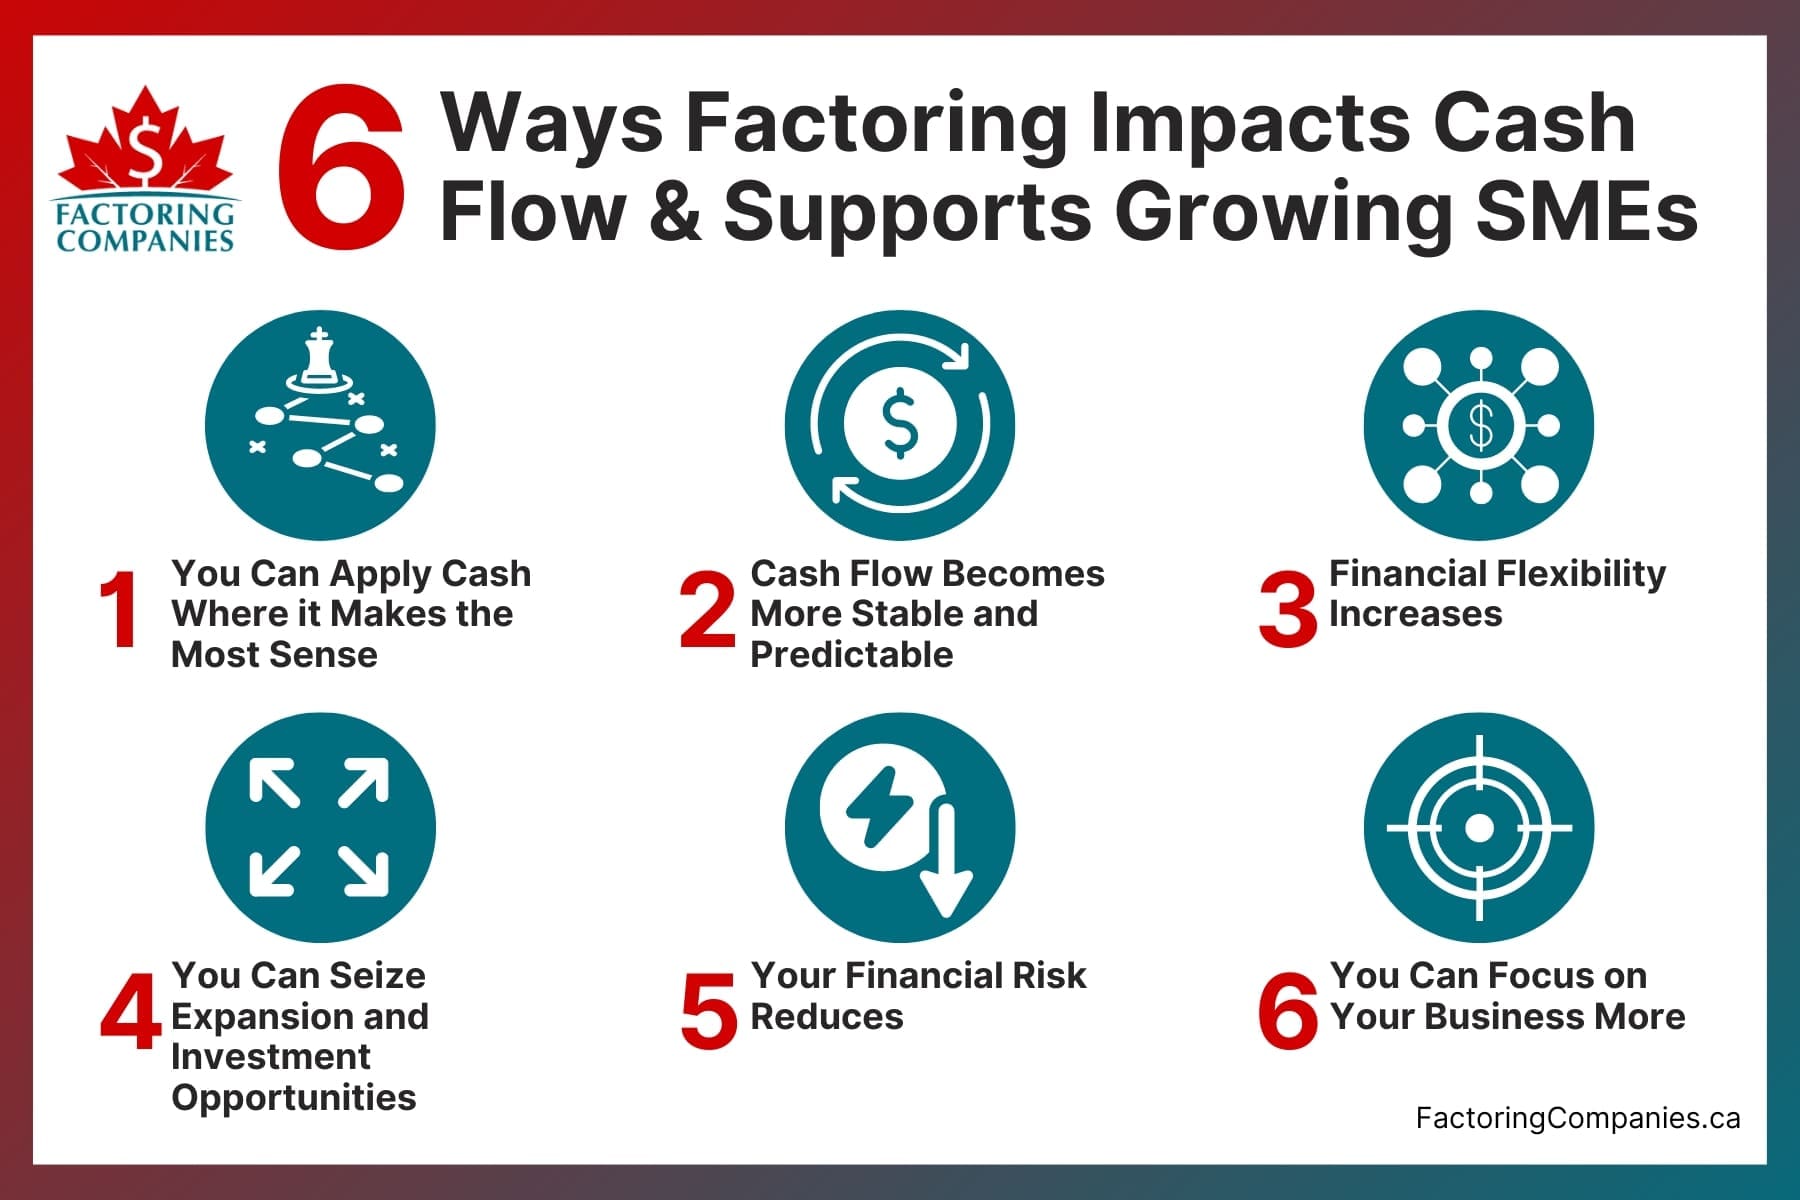 6 Ways Factoring Impacts Cash Flow and Supports Growing SMEs